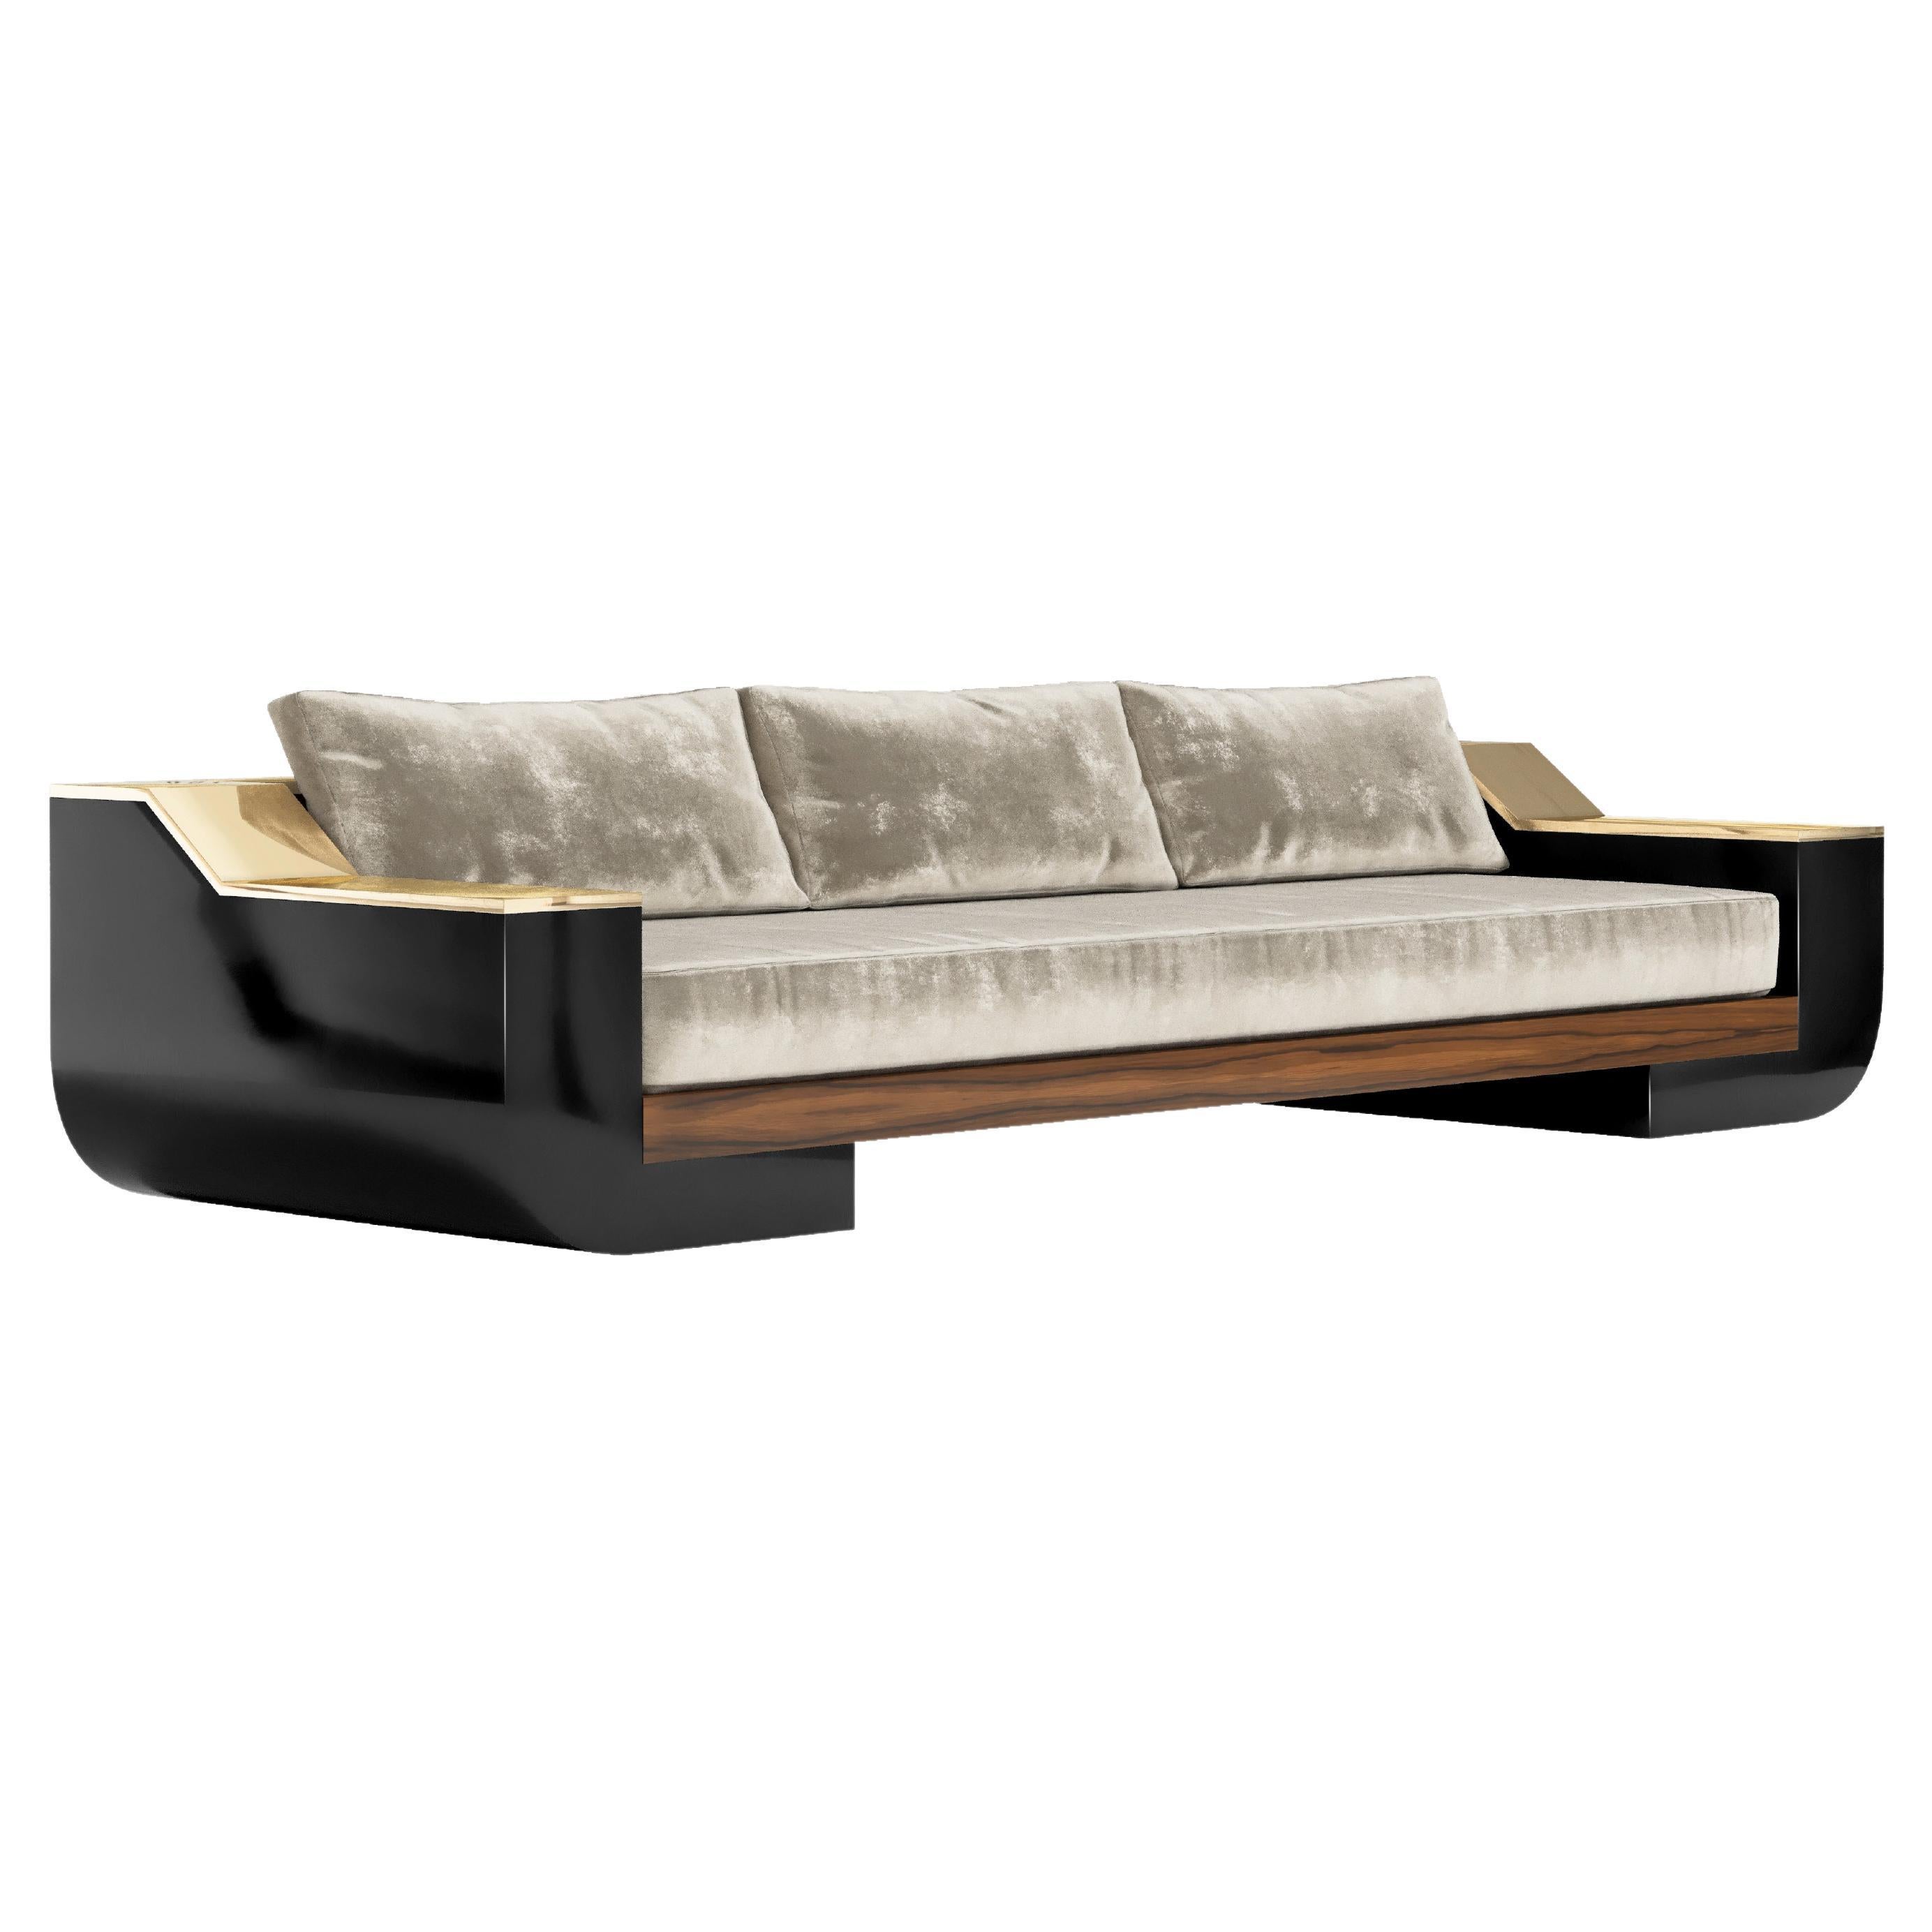 Meilleur Nom Sofa in Black Lacquer and Polished Bronze by Palena Furniture